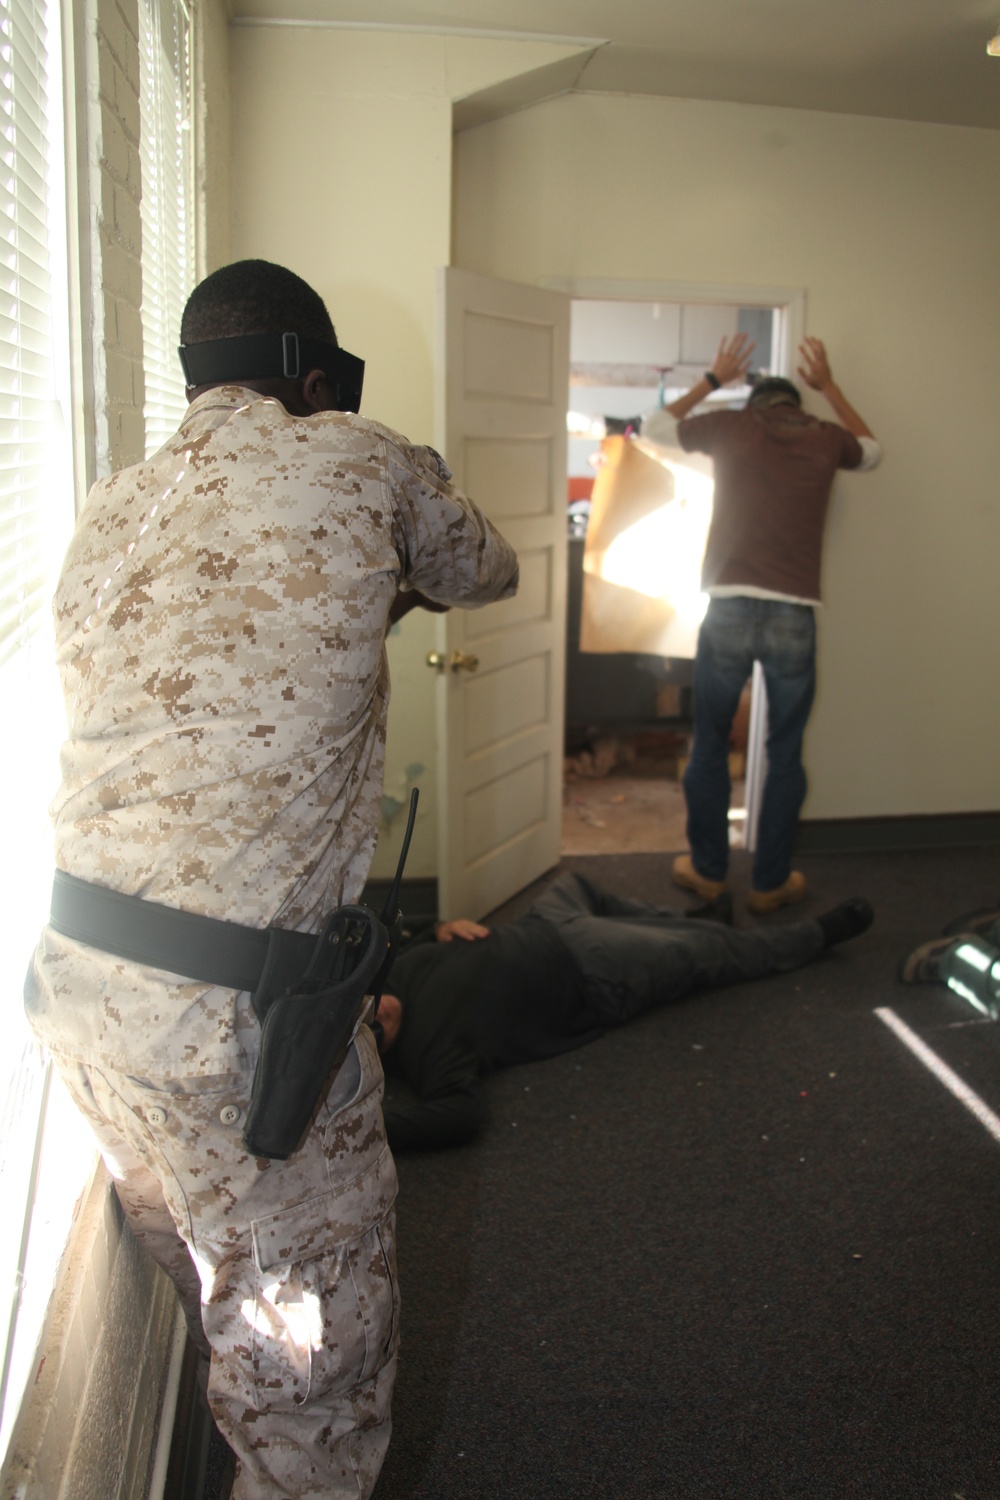 Shots fired: Cherry Point police conduct active shooter training